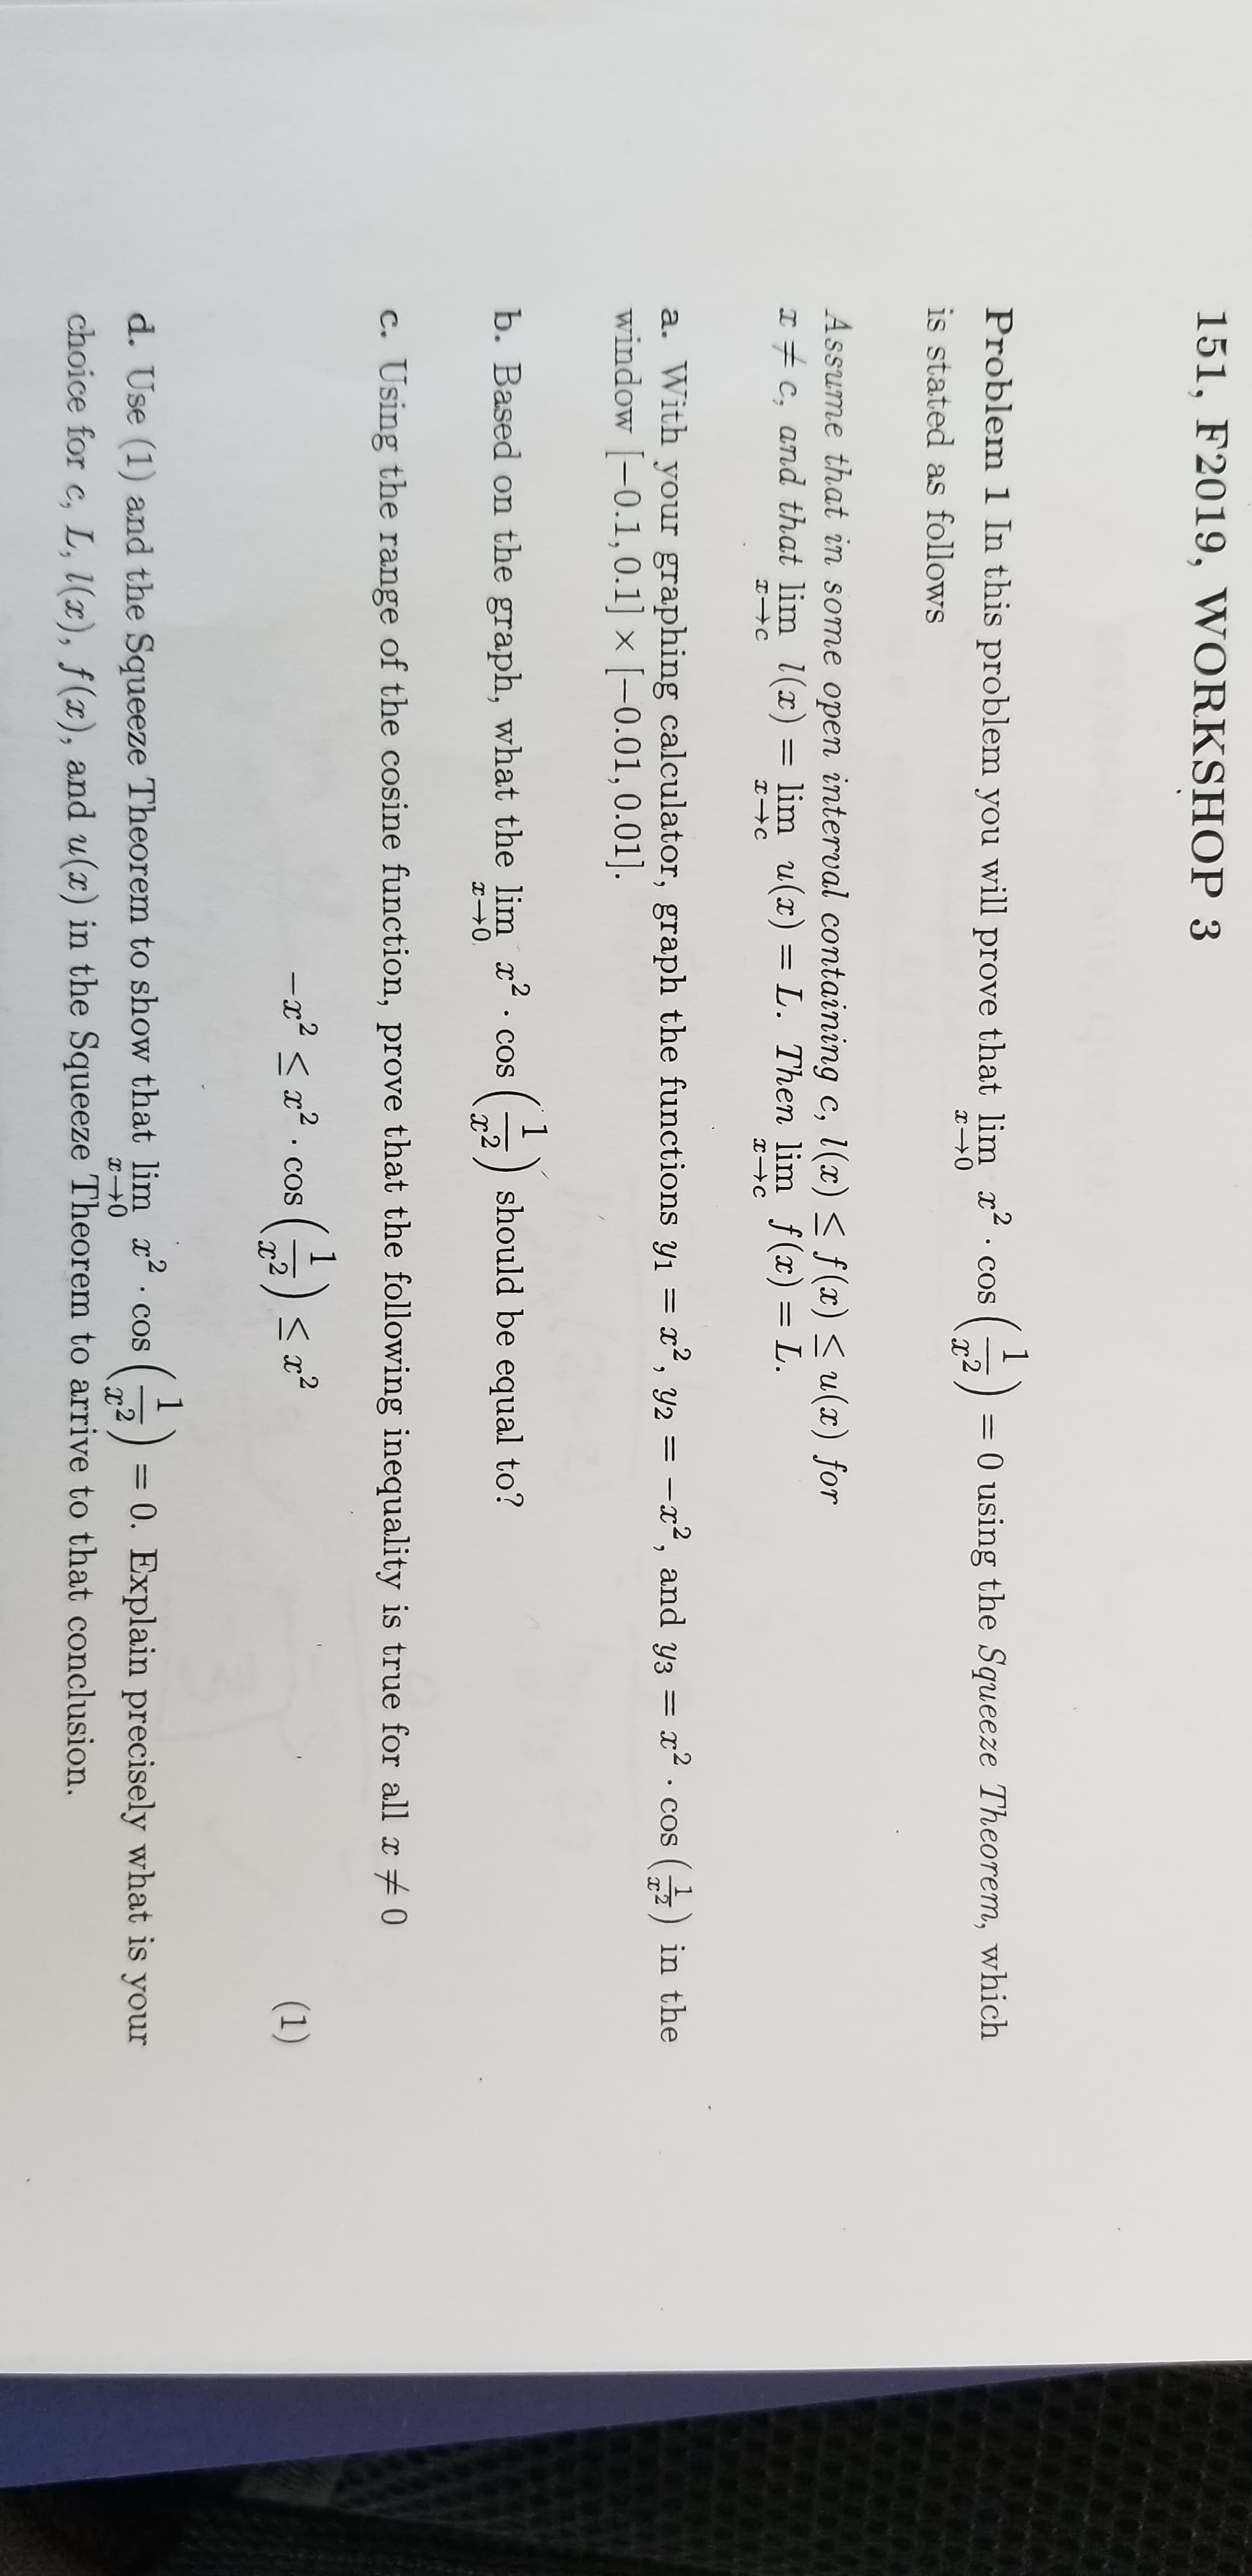 151, F2019, WORKSHOP 3
Problem 1 In this problem you will prove that lim
2
COS
0 using the Squeeze Theorem, which
I0
is stated as follows
Assume that in some open interval containing c, l(x) < f(x)u(x) for
I C, and that lim l(x)
lim u(x) = L. Then lim f(x) = L.
a. With your graphing calculator, graph the functions y1
window -0.1, 0.1] x [-0.01,0.01]
, y2=
-12, and y3
COS
in the
11
b. Based on the graph, what the lim x
T0
2 .
should be equal to?
COS
2
Using the range of the cosine function, prove that the following inequality is true for all x0
C.
IC
1
()
-Ix
2
COS
(1)
d. Use (1) and the Squeeze Theorem to show that lim x cos
= 0. Explain precisely what is your
2
I0
choice for c, L, l(x), f(x), and u(x) in the Squeeze Theorem to arrive to that conclusion.
